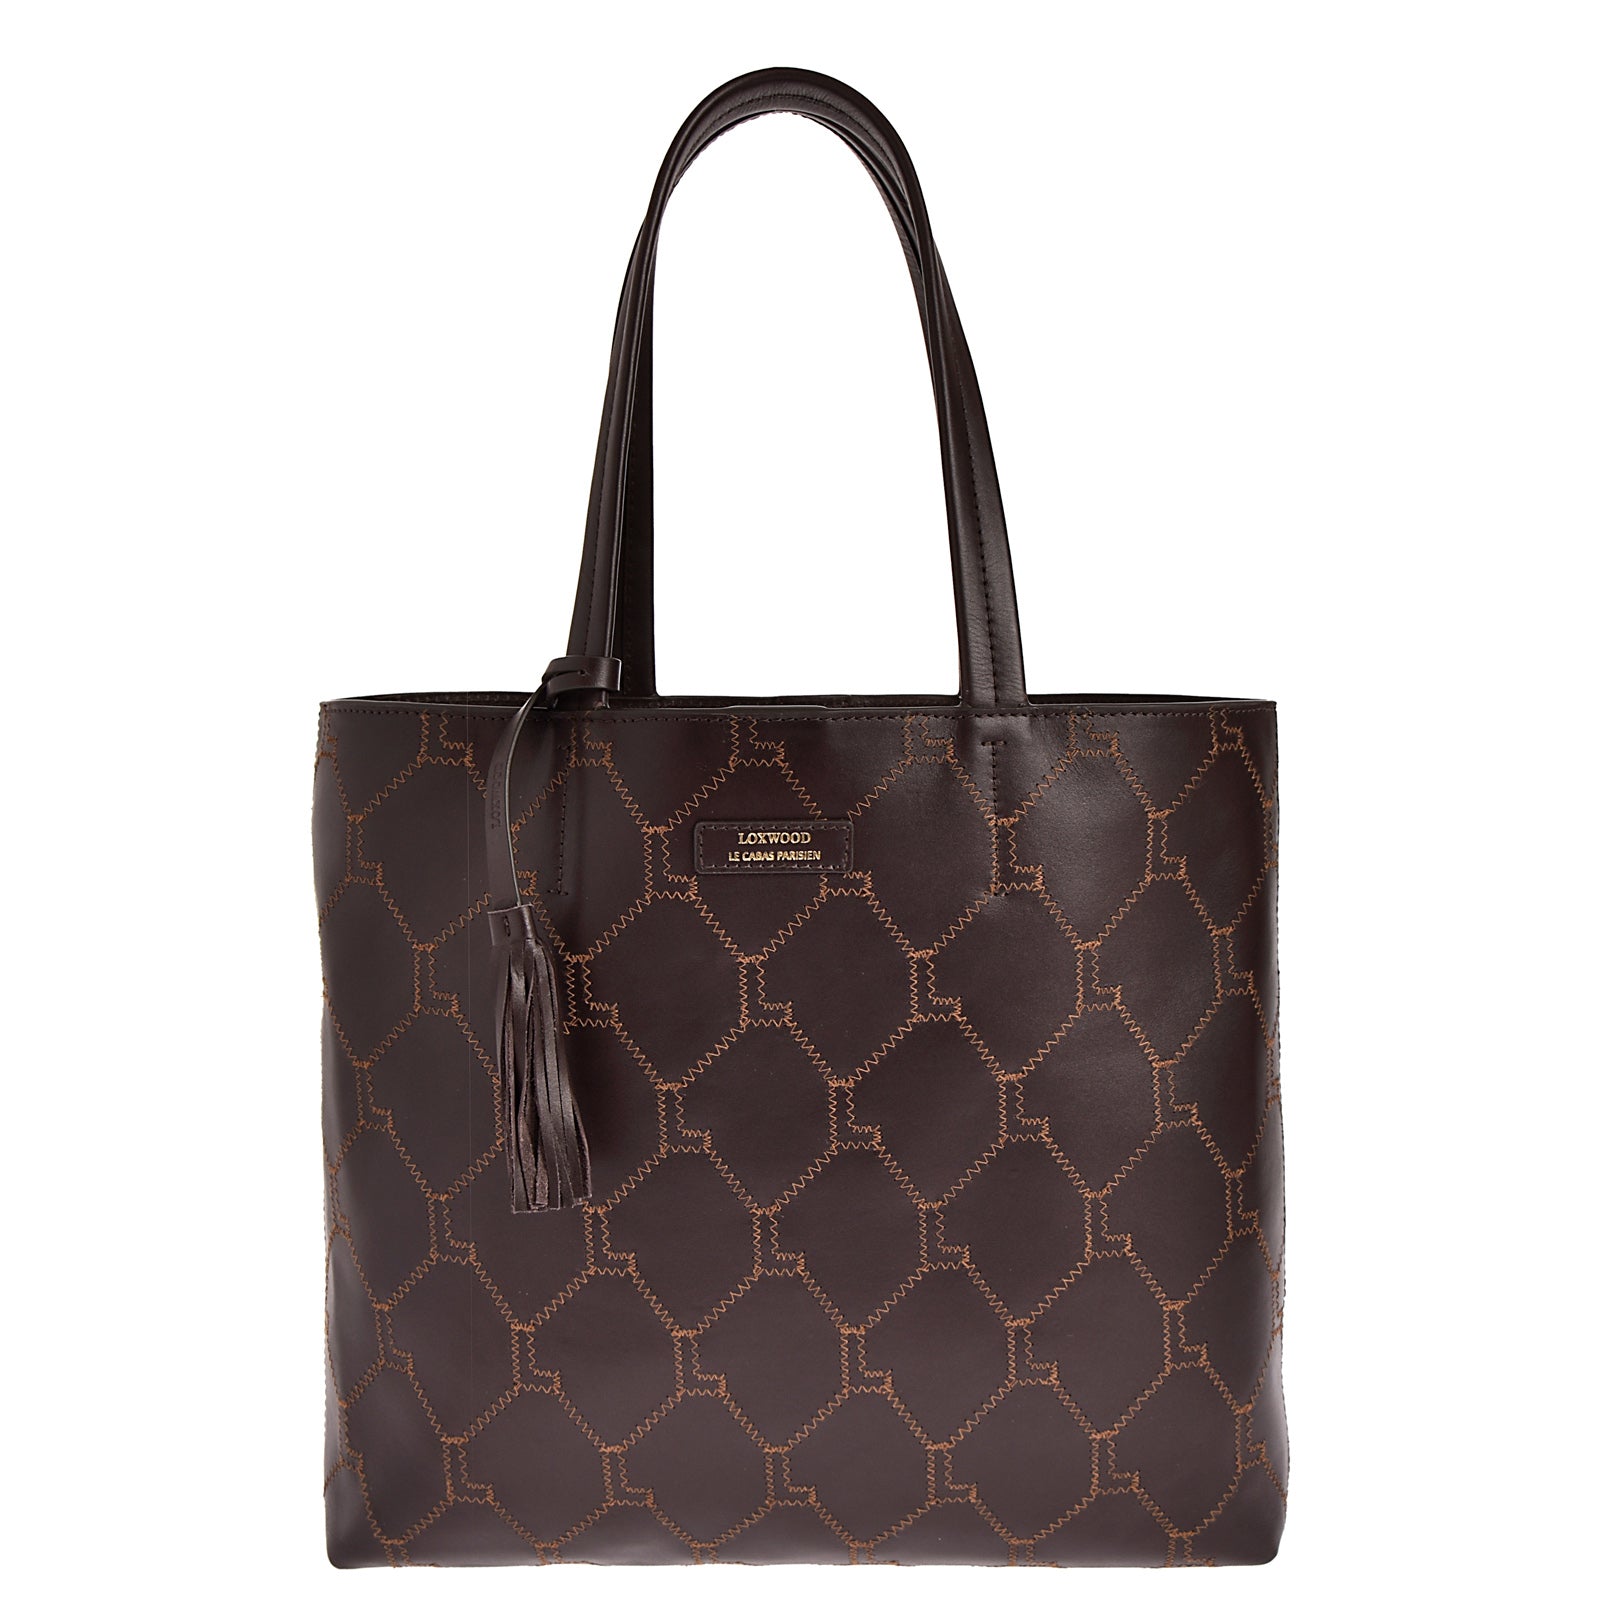 CHARLIE - LARGE SIGNATURE EMBROIDERED LEATHER TOTE